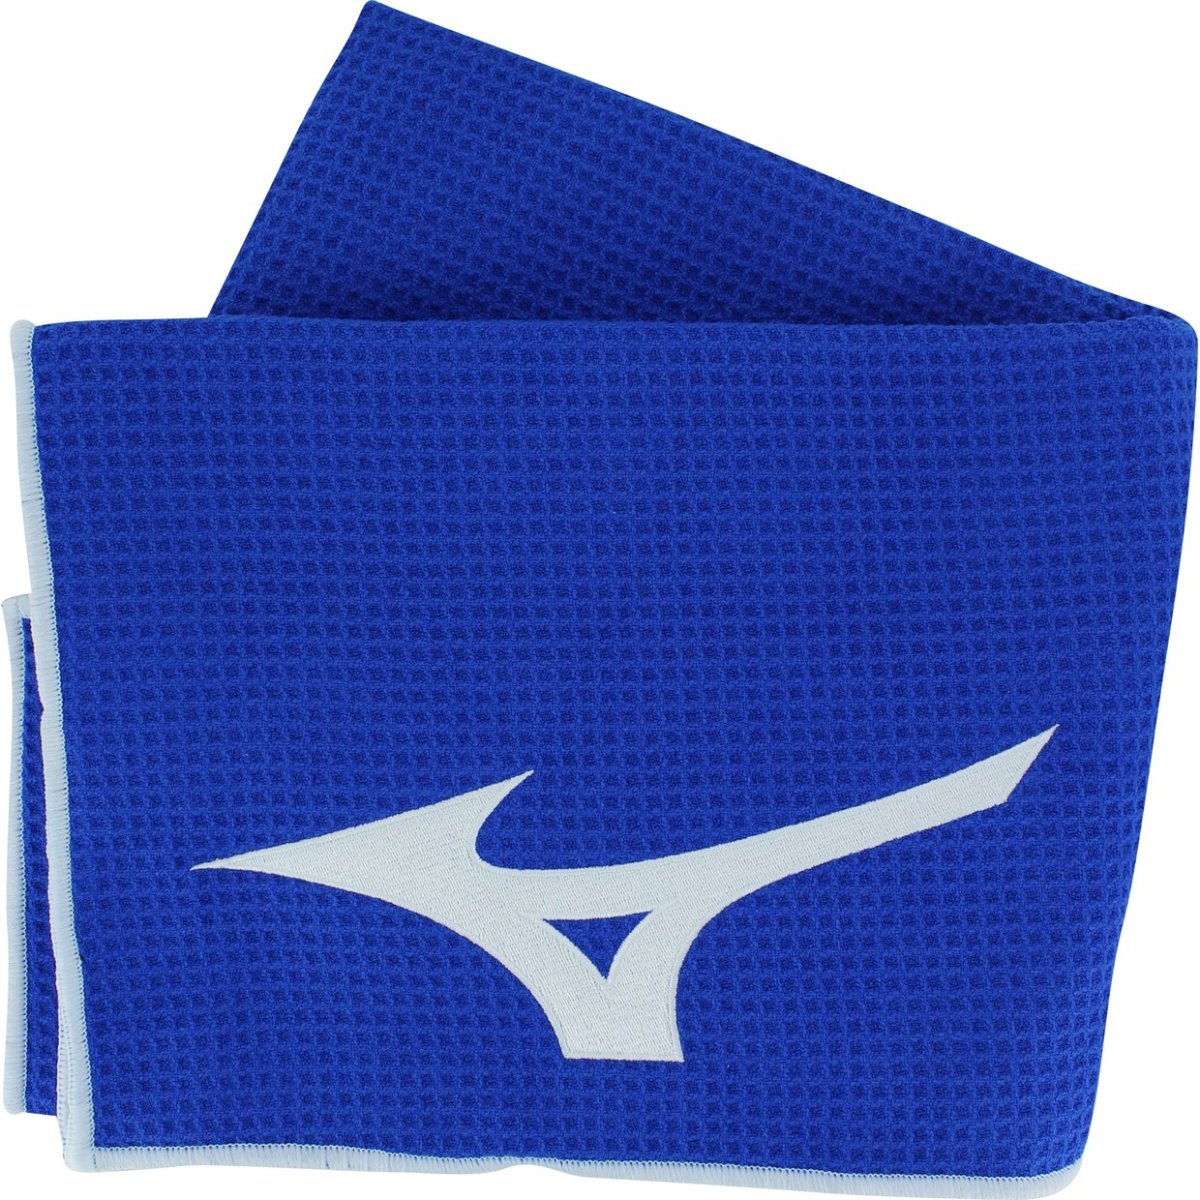 Shop the latest golf towels, like the Mizuno Microfiber Tour Towel, on Morning Read's online pro shop, powered by GlobalGolf.